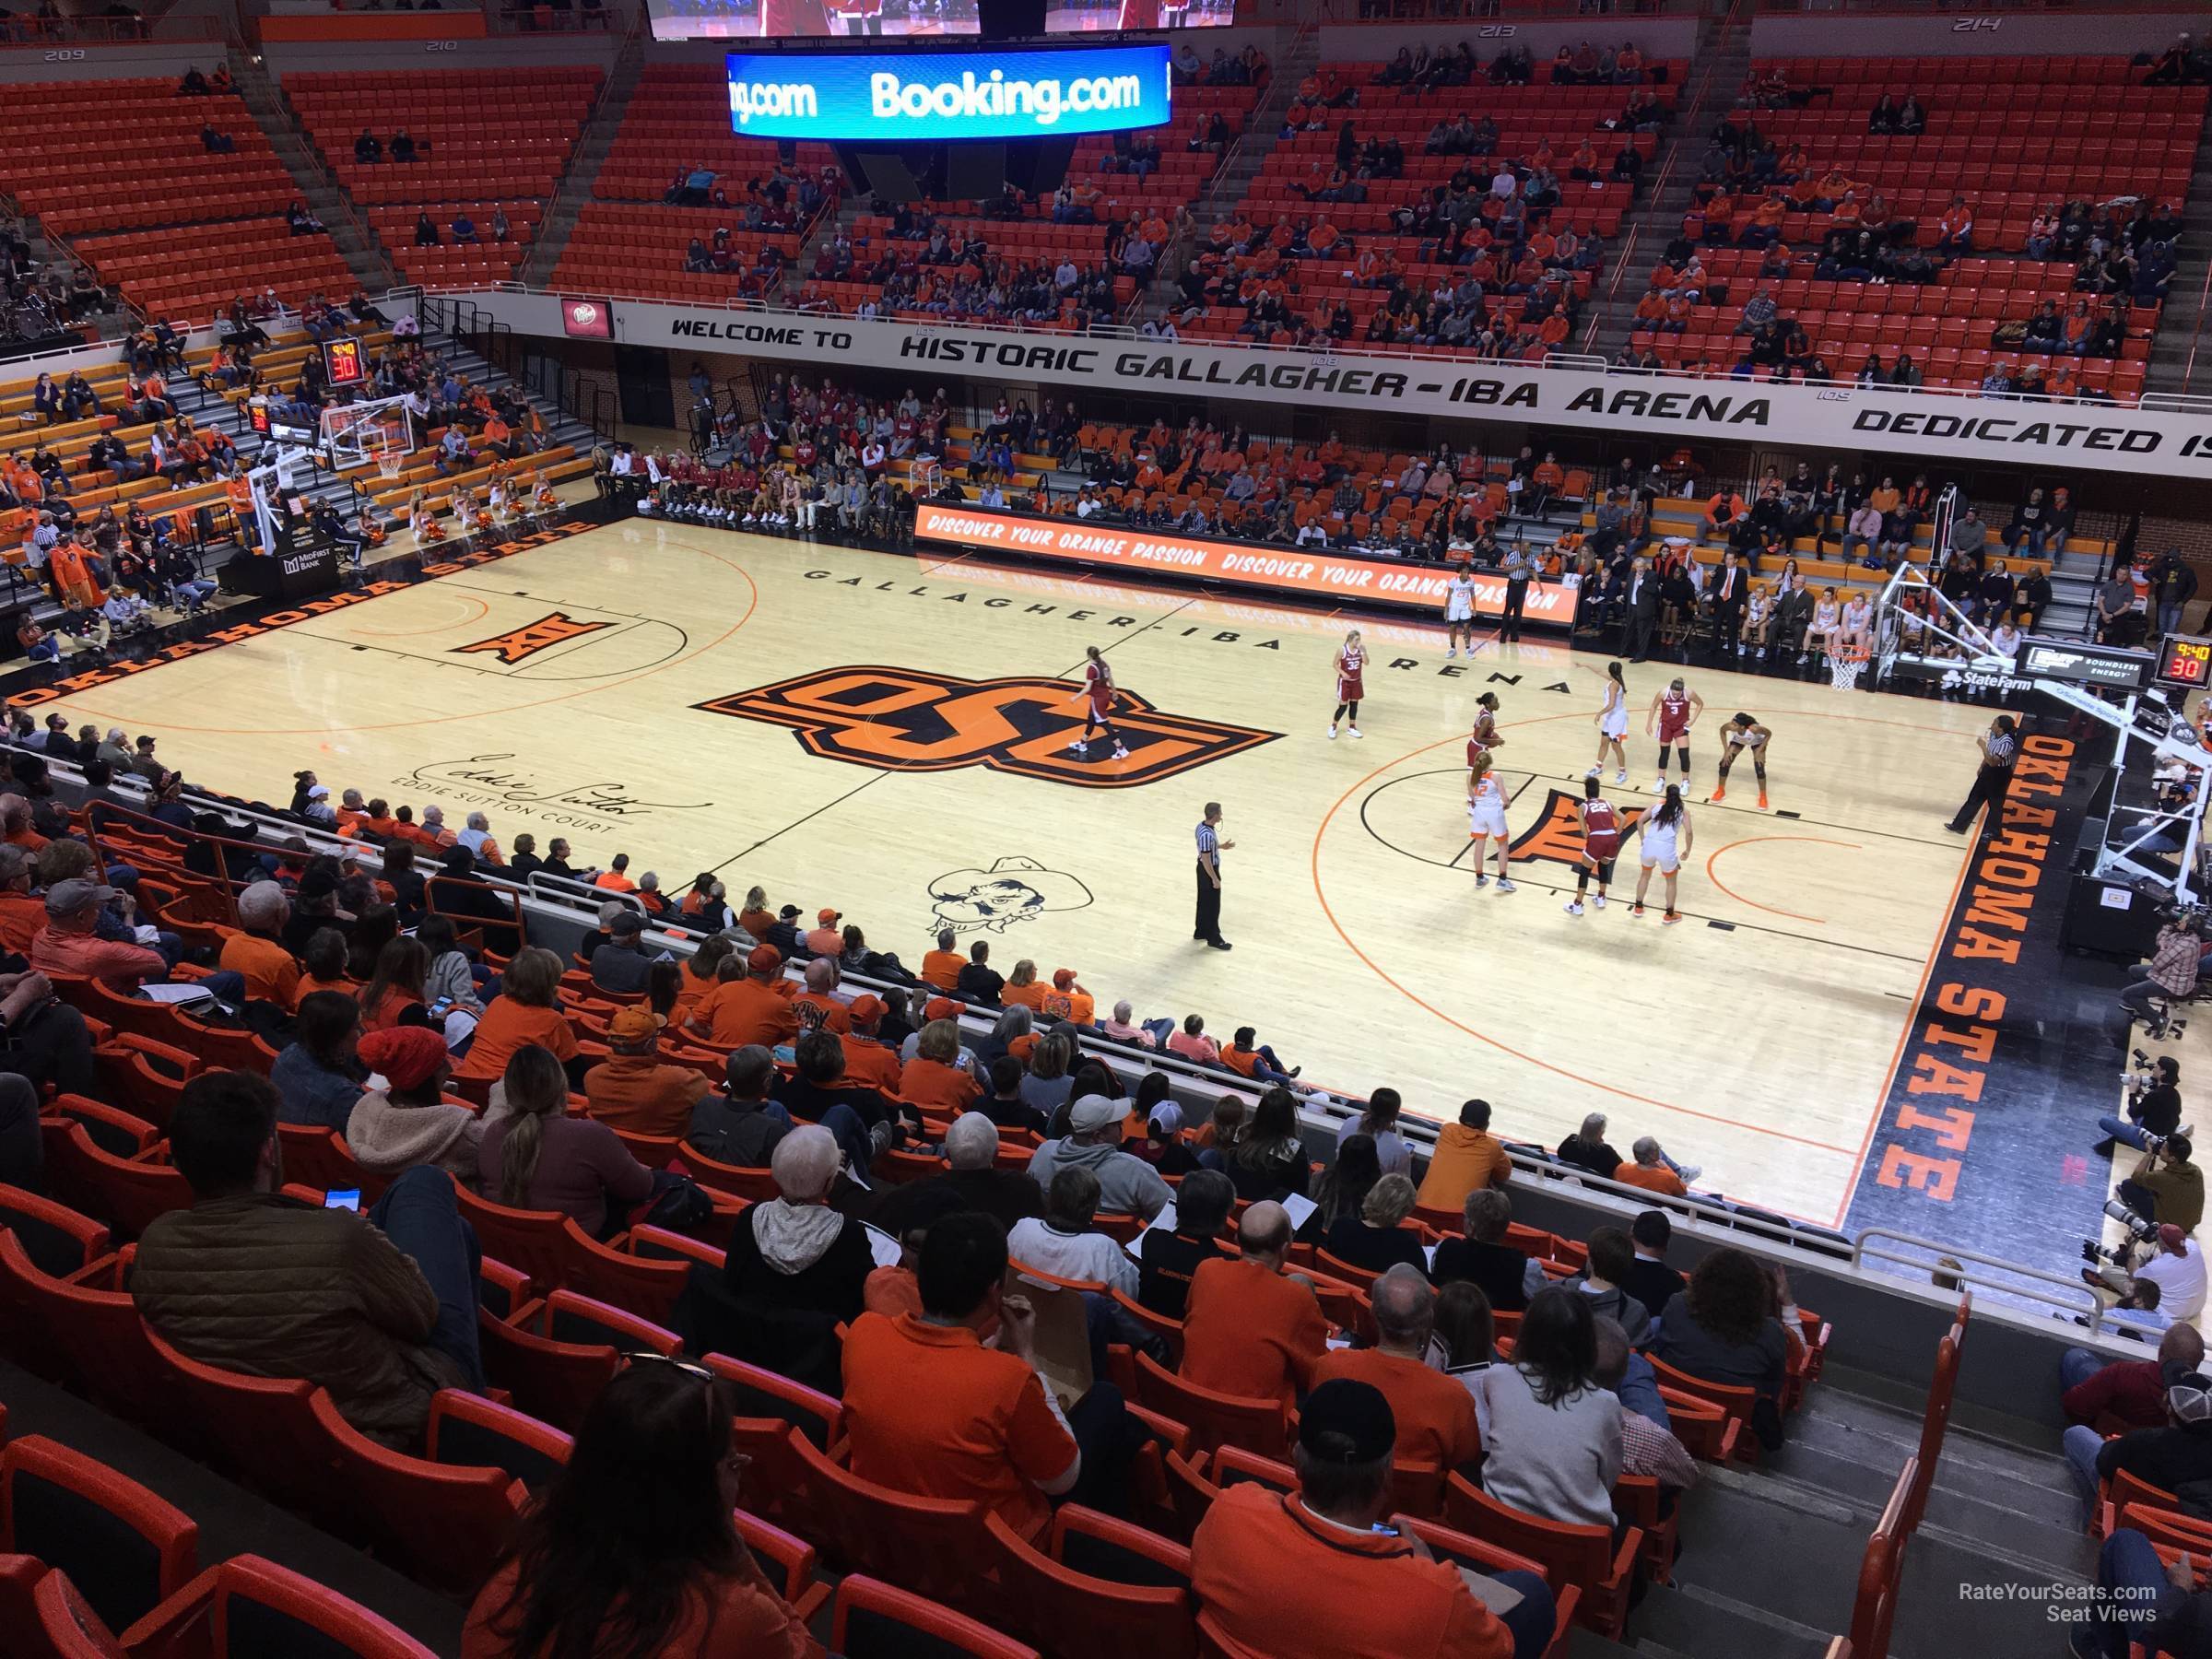 section 201, row 13 seat view  - gallagher-iba arena